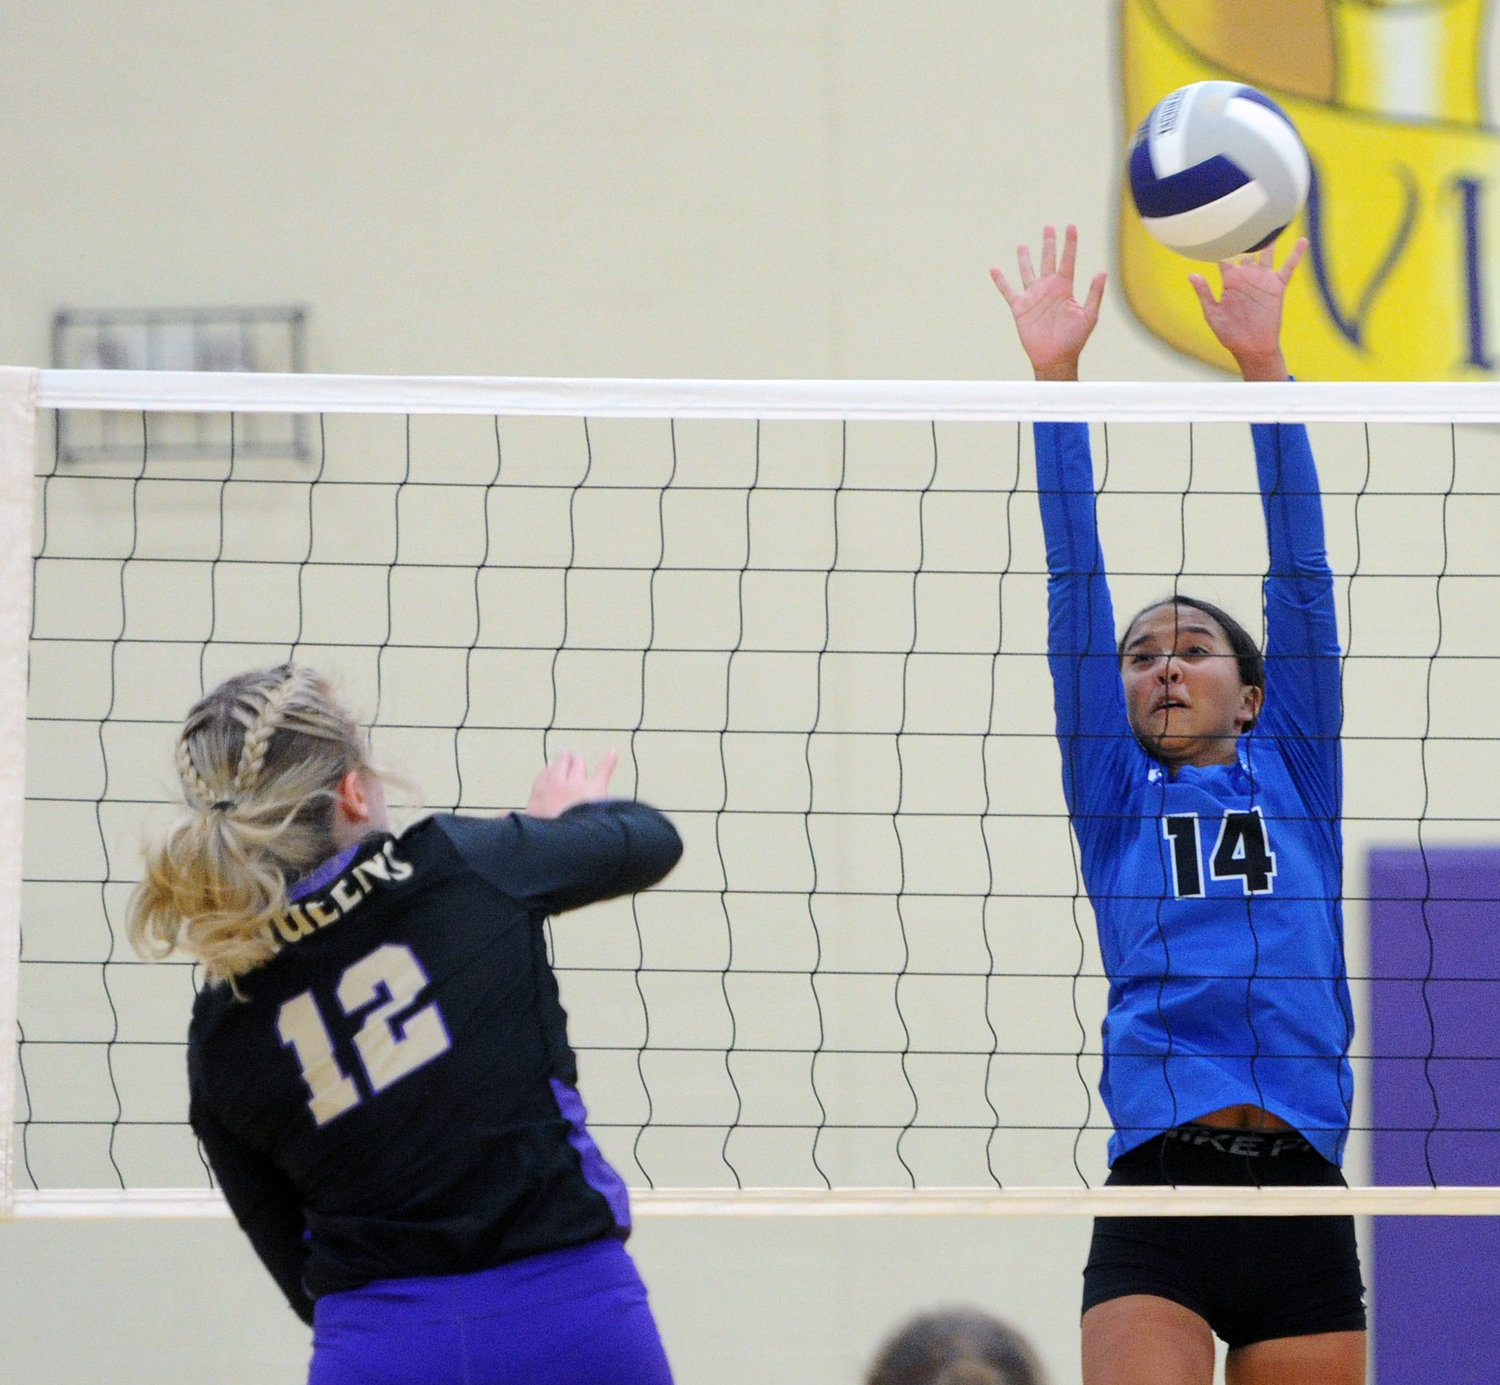 Autumn Sweatt (14) goes up tall for a block on a shot against Community.